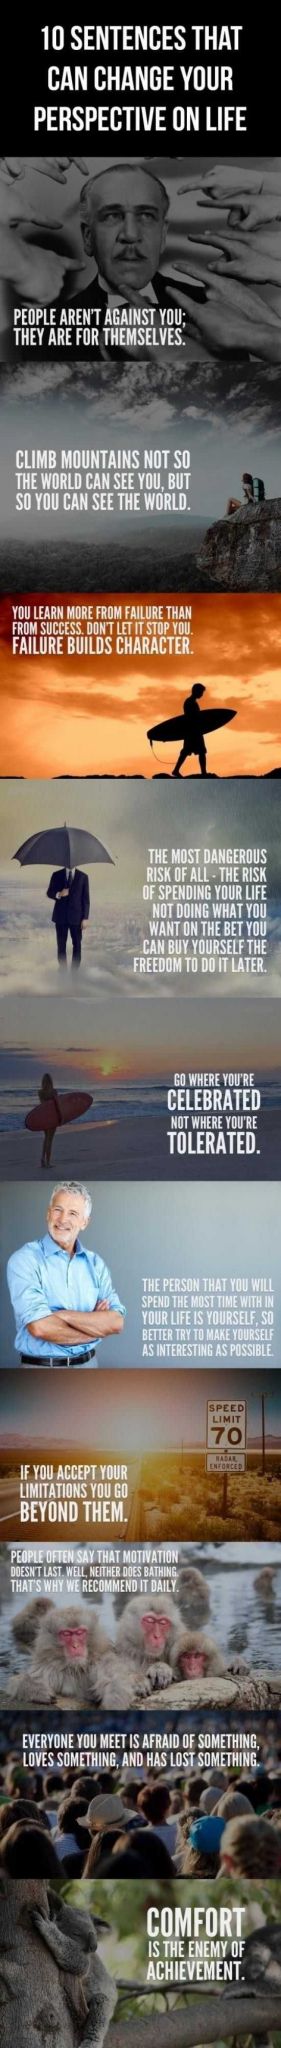 F Scott Fitzgerald the Great American Dreamer Worksheet Answers together with 376 Best today S Mindset Images On Pinterest